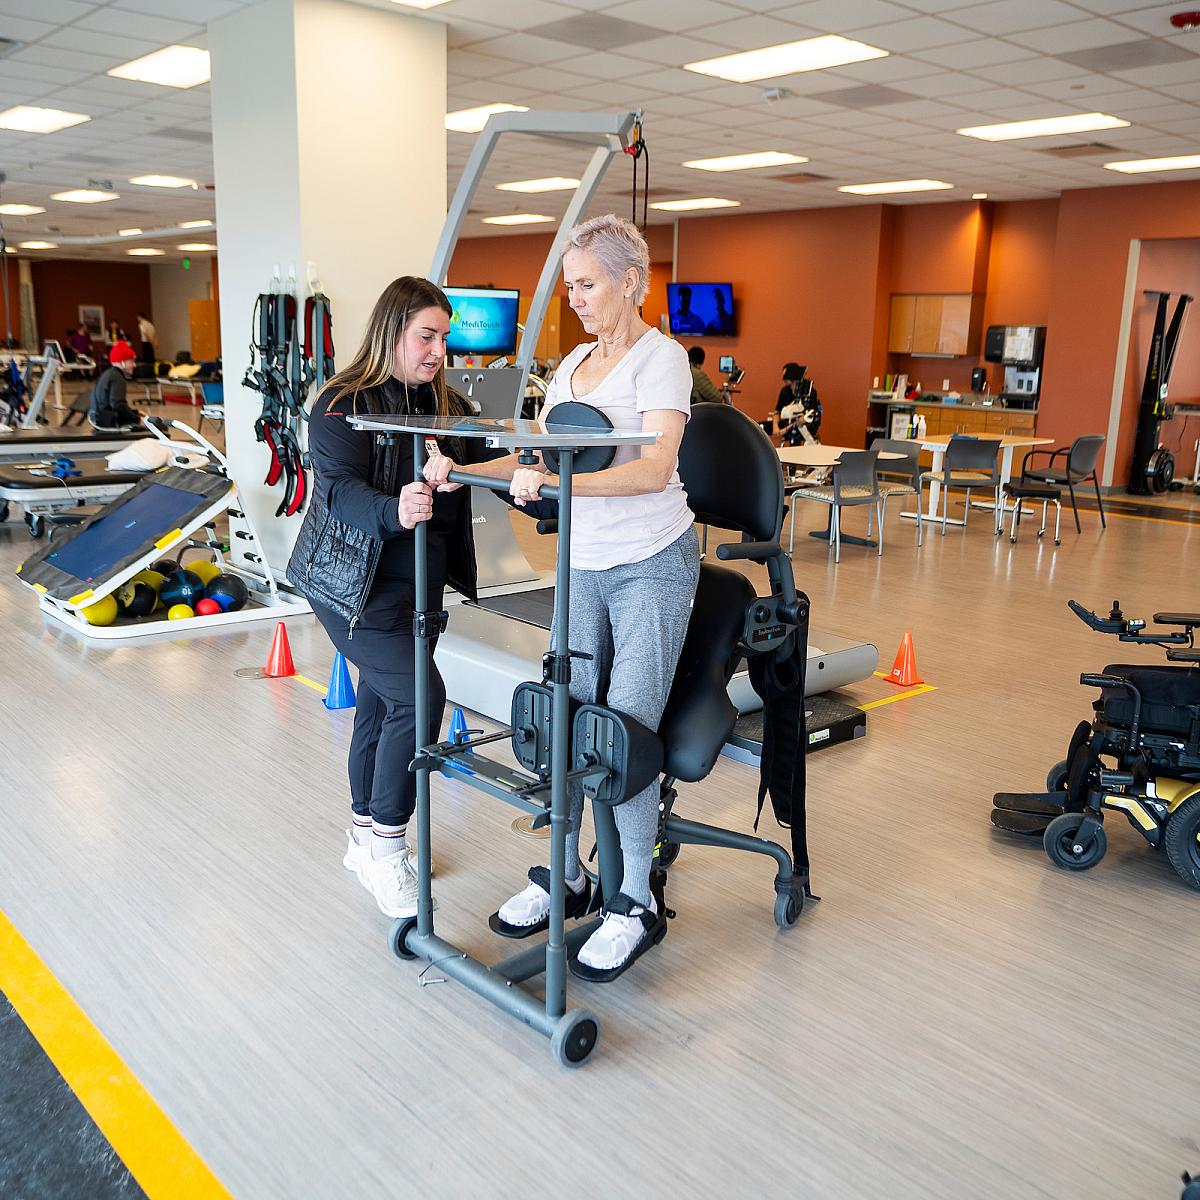 Female U of U Health employee helps a woman with a lift chair in a large gym